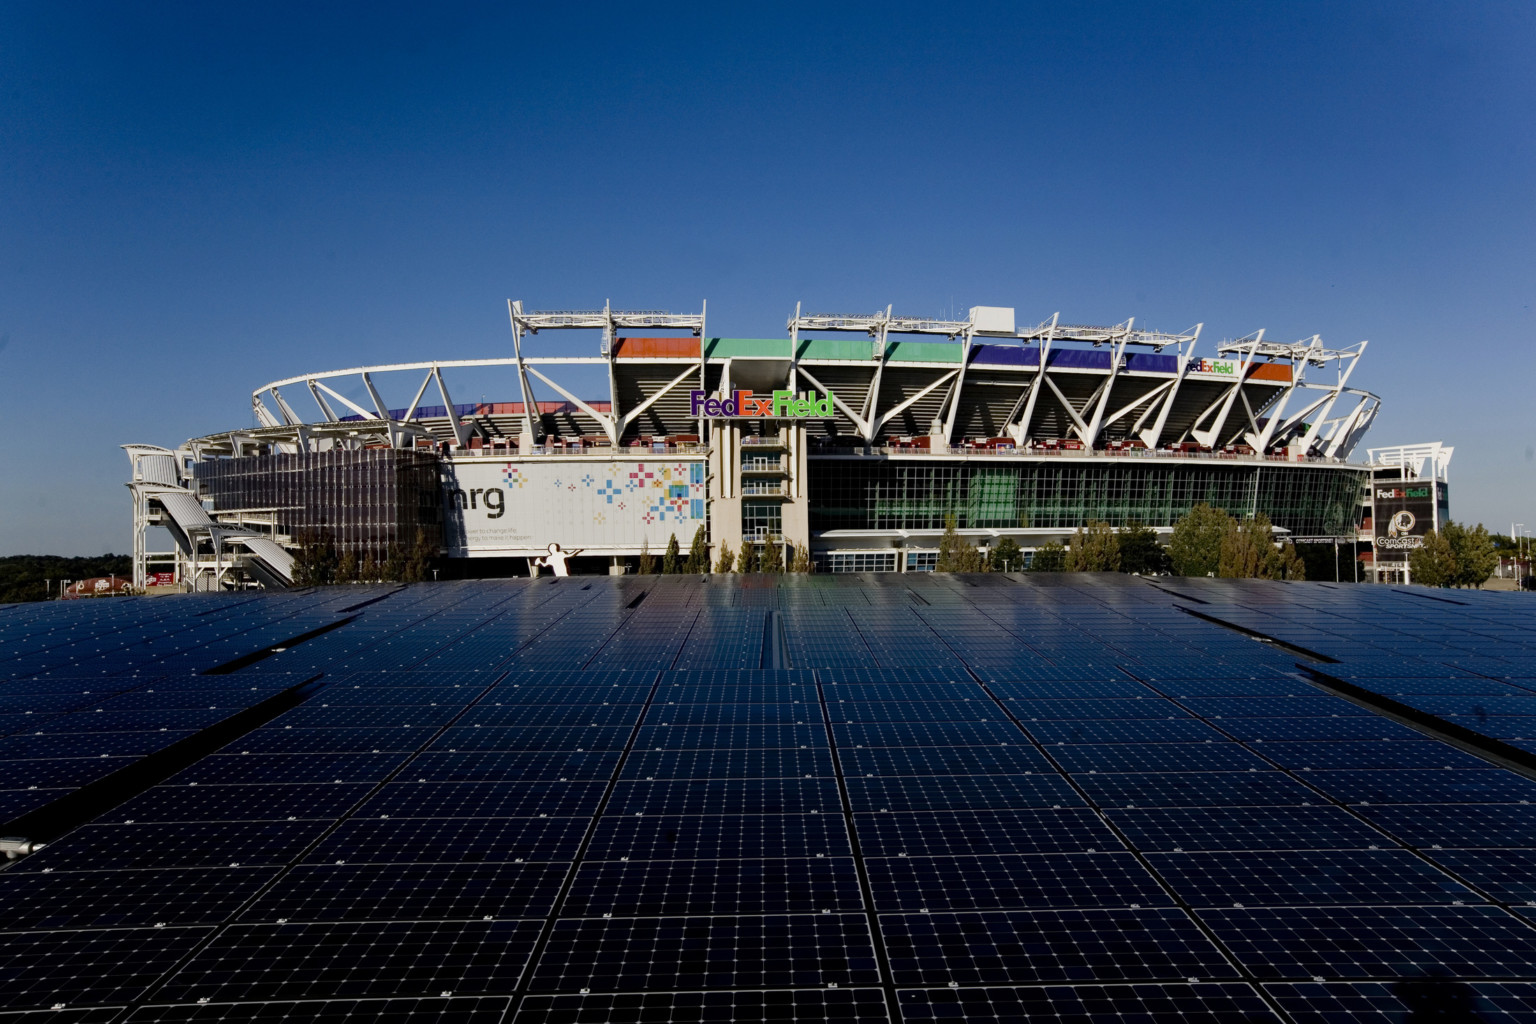 FedExField, home of the Washington Commanders, with large-scale solar array before stadium with LED display, glass facade